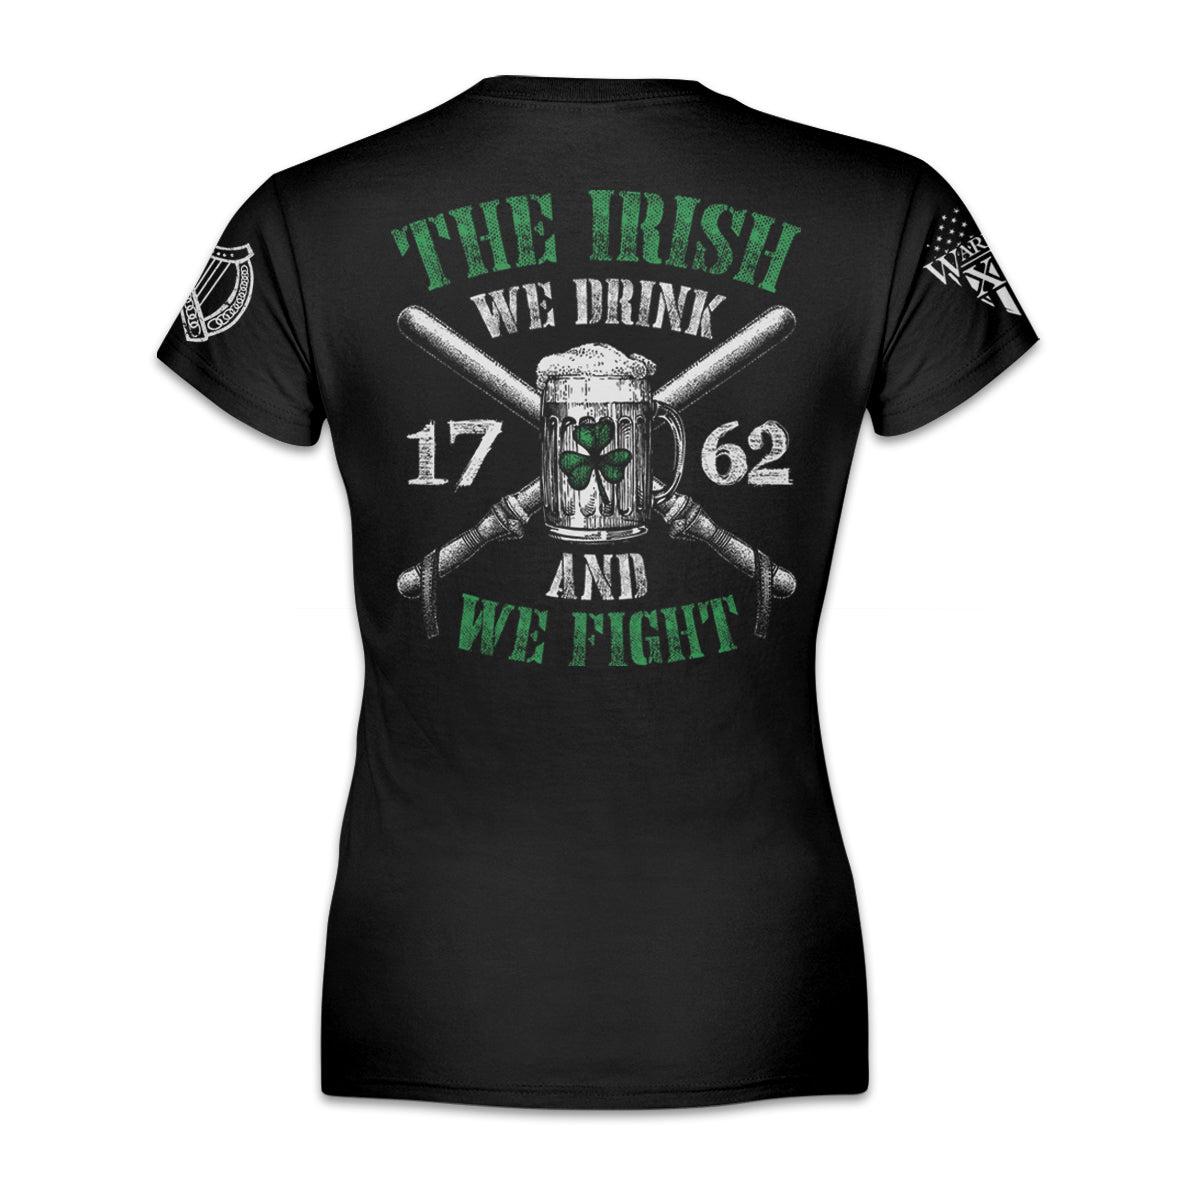 A black women's relaxed fit shirt with the words "The Irish - We Drink And We Fight" with an Irish beer mug printed on the back of the  shirt.